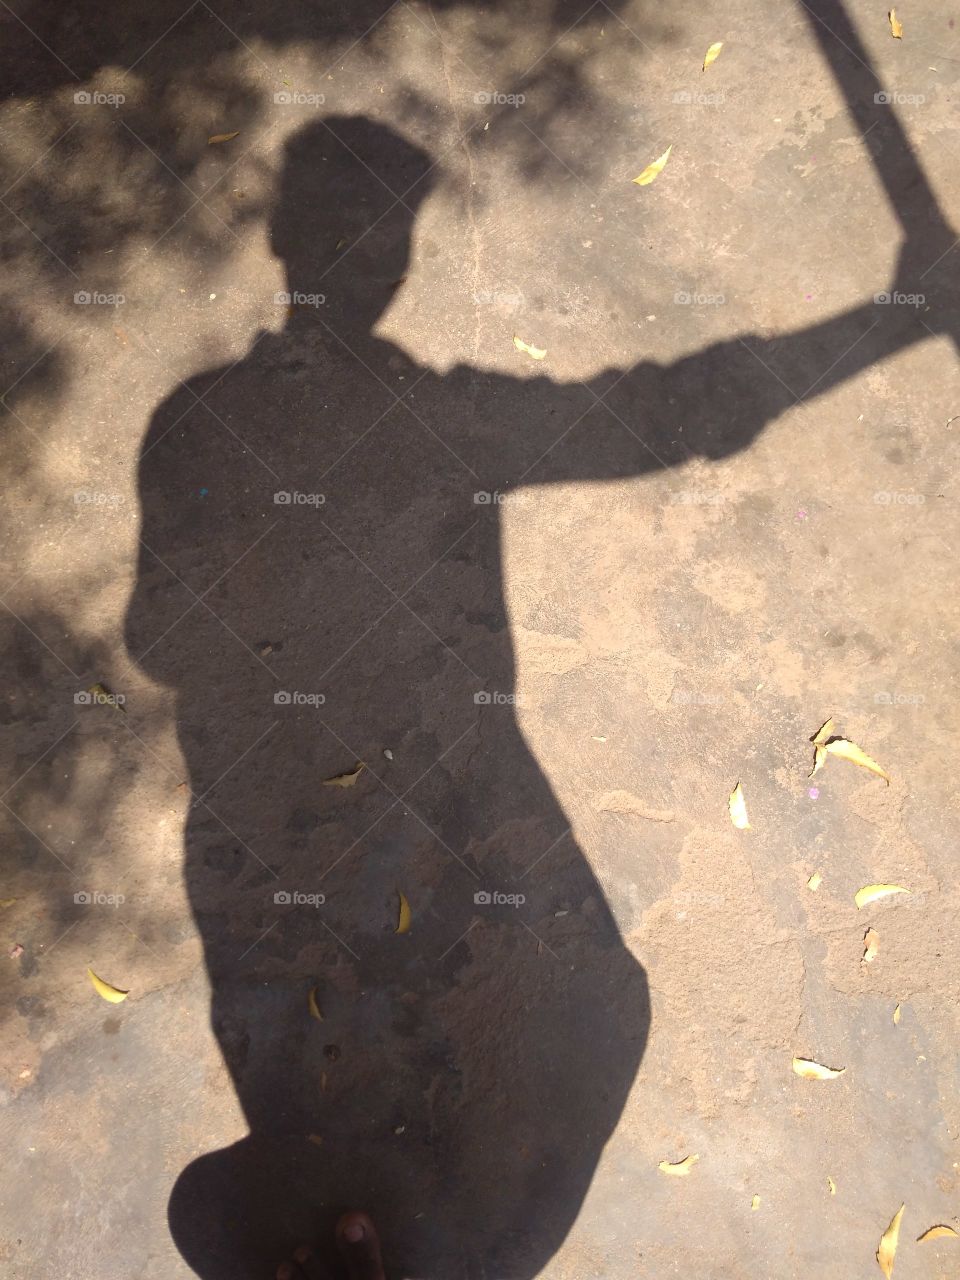 This is my shadow